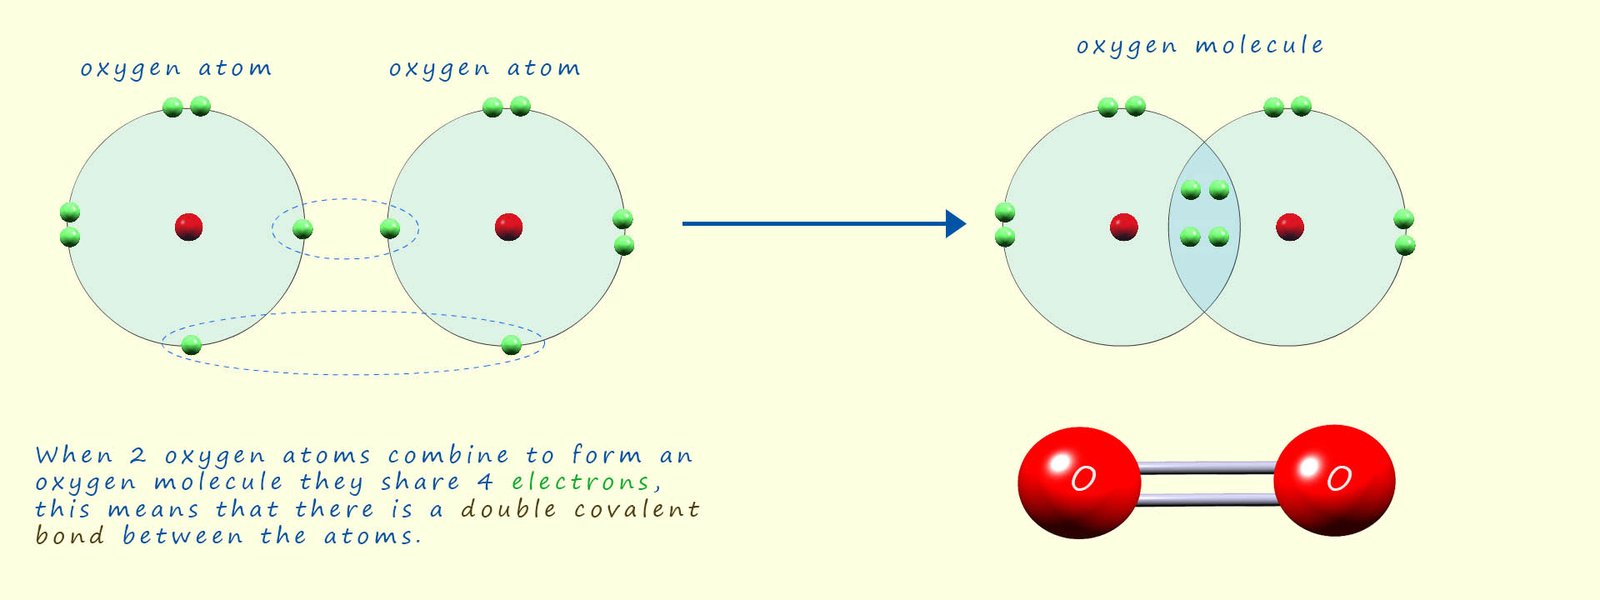 Image showing how two oxygen atoms combine to form an oxygen molecule containing a double covalent bond.